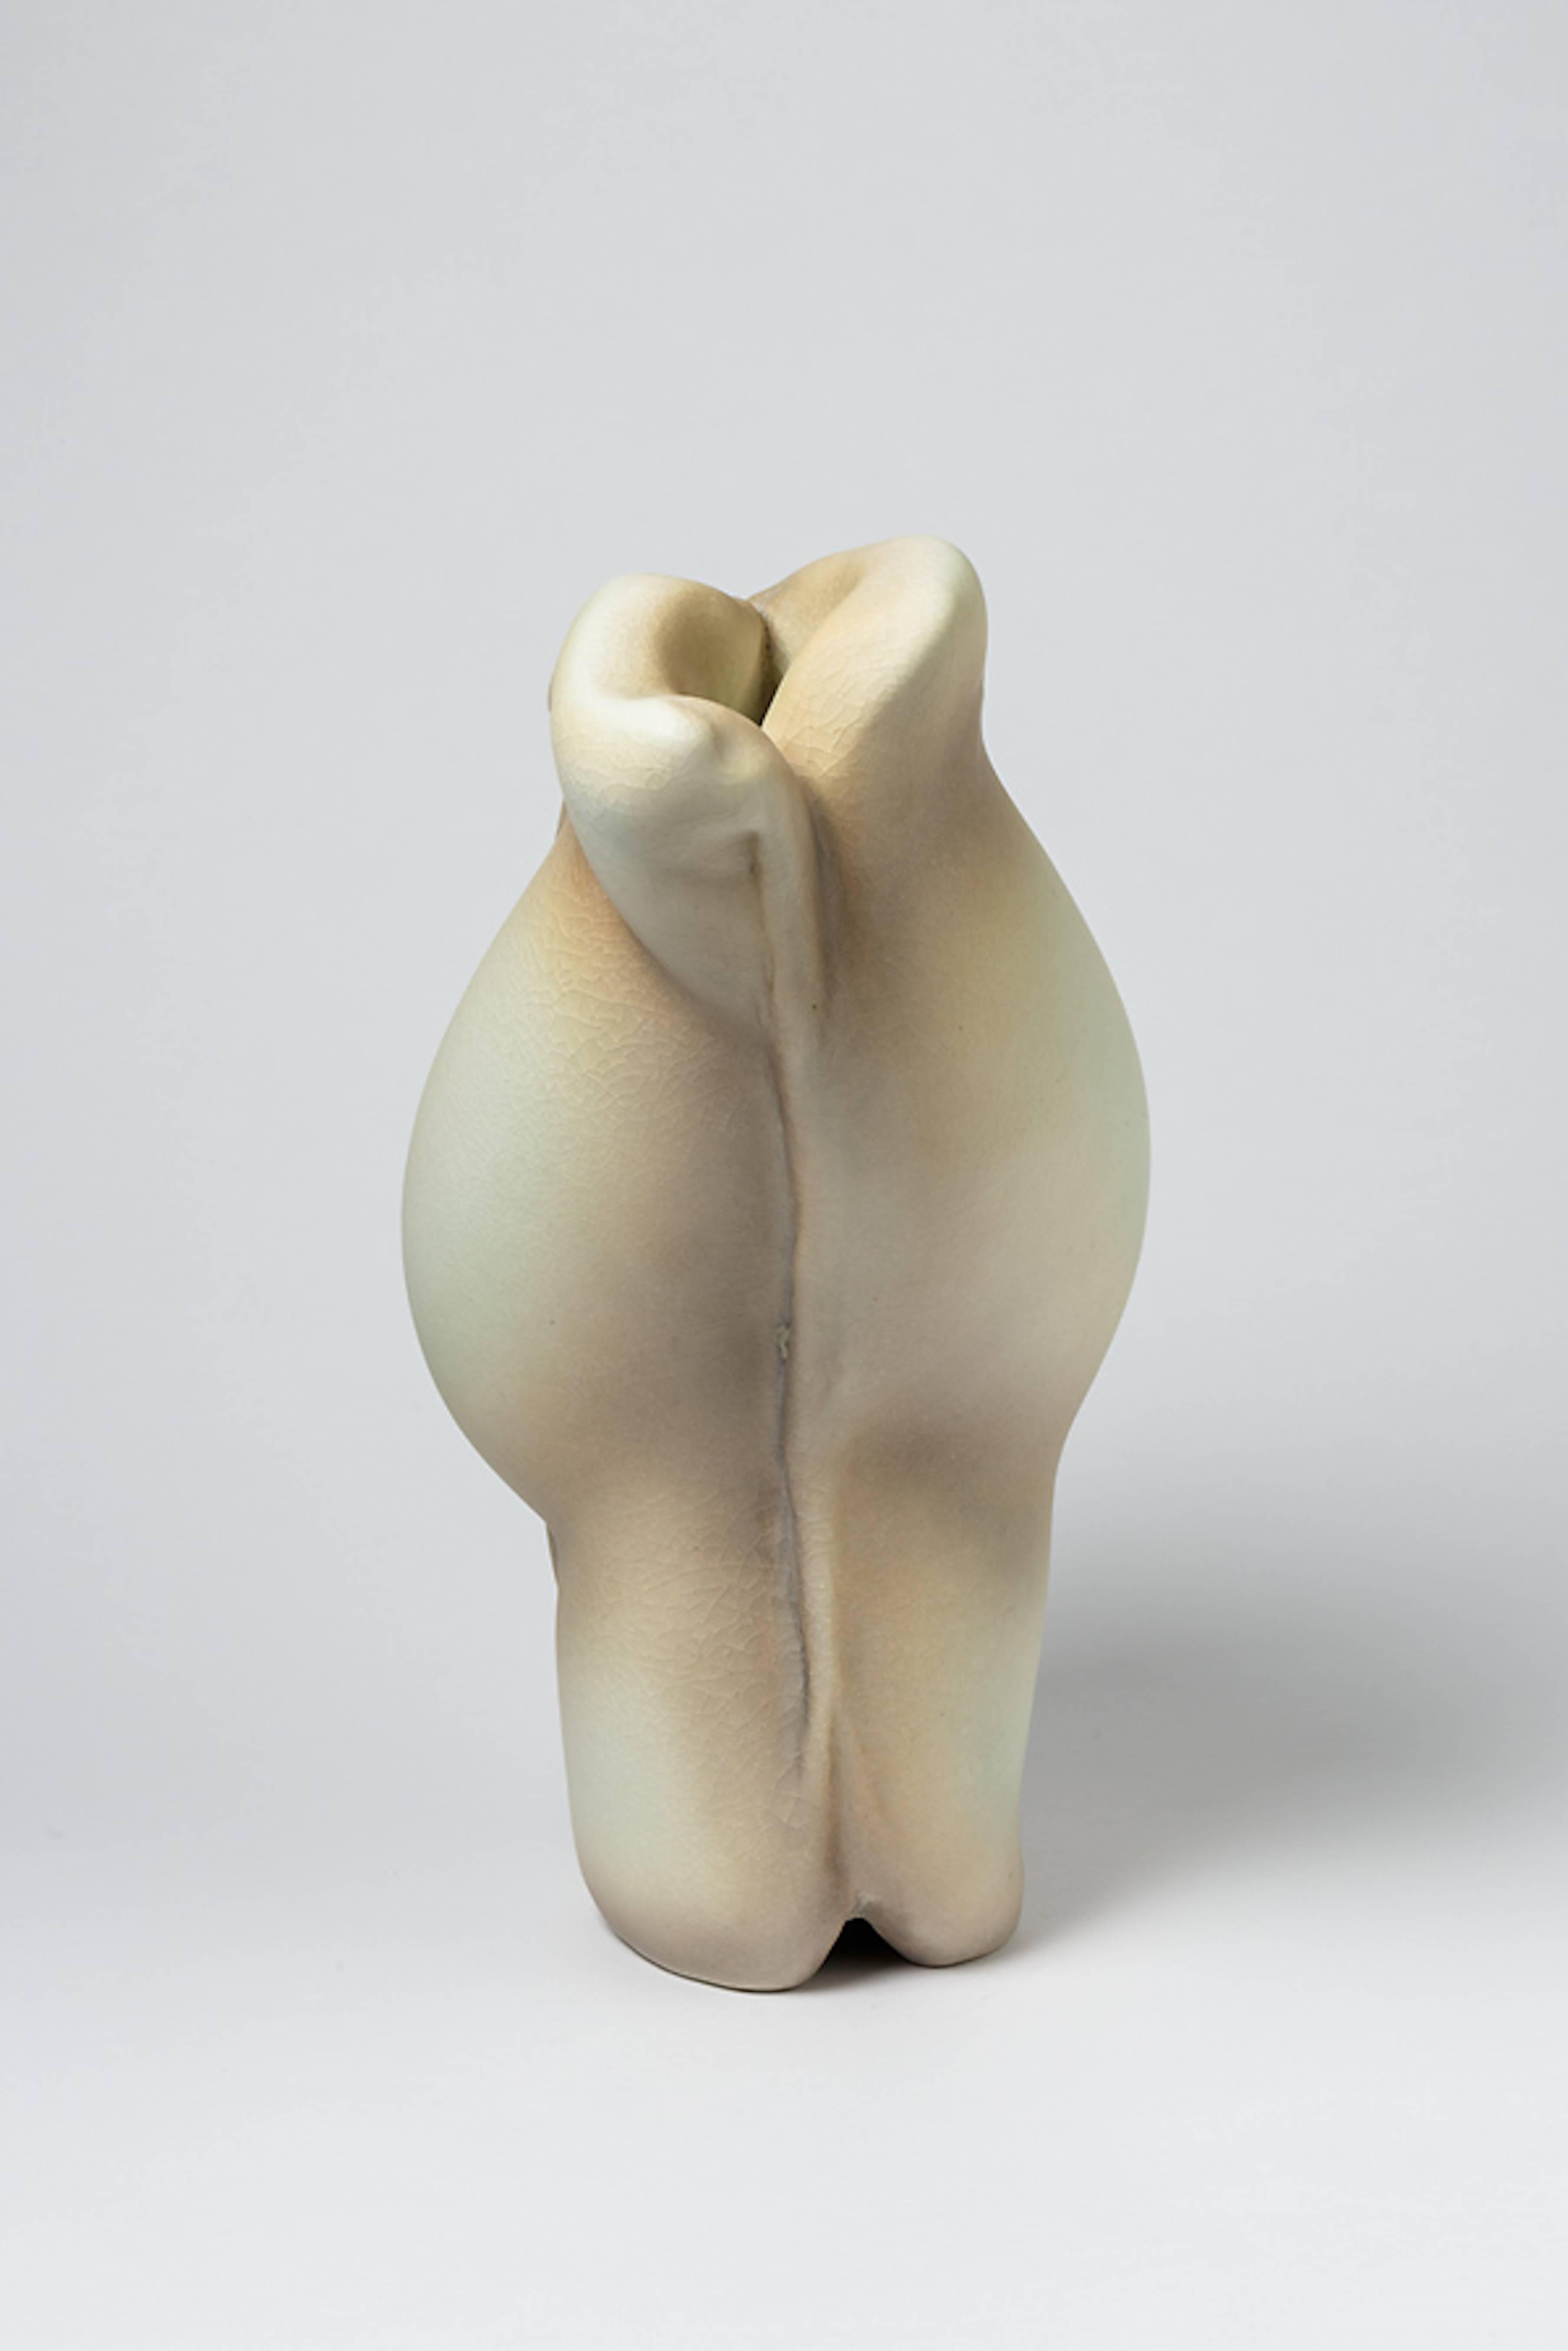 A porcelain sculpture by Wayne Fischer (French-American).
Unique piece.
Signed at the base 